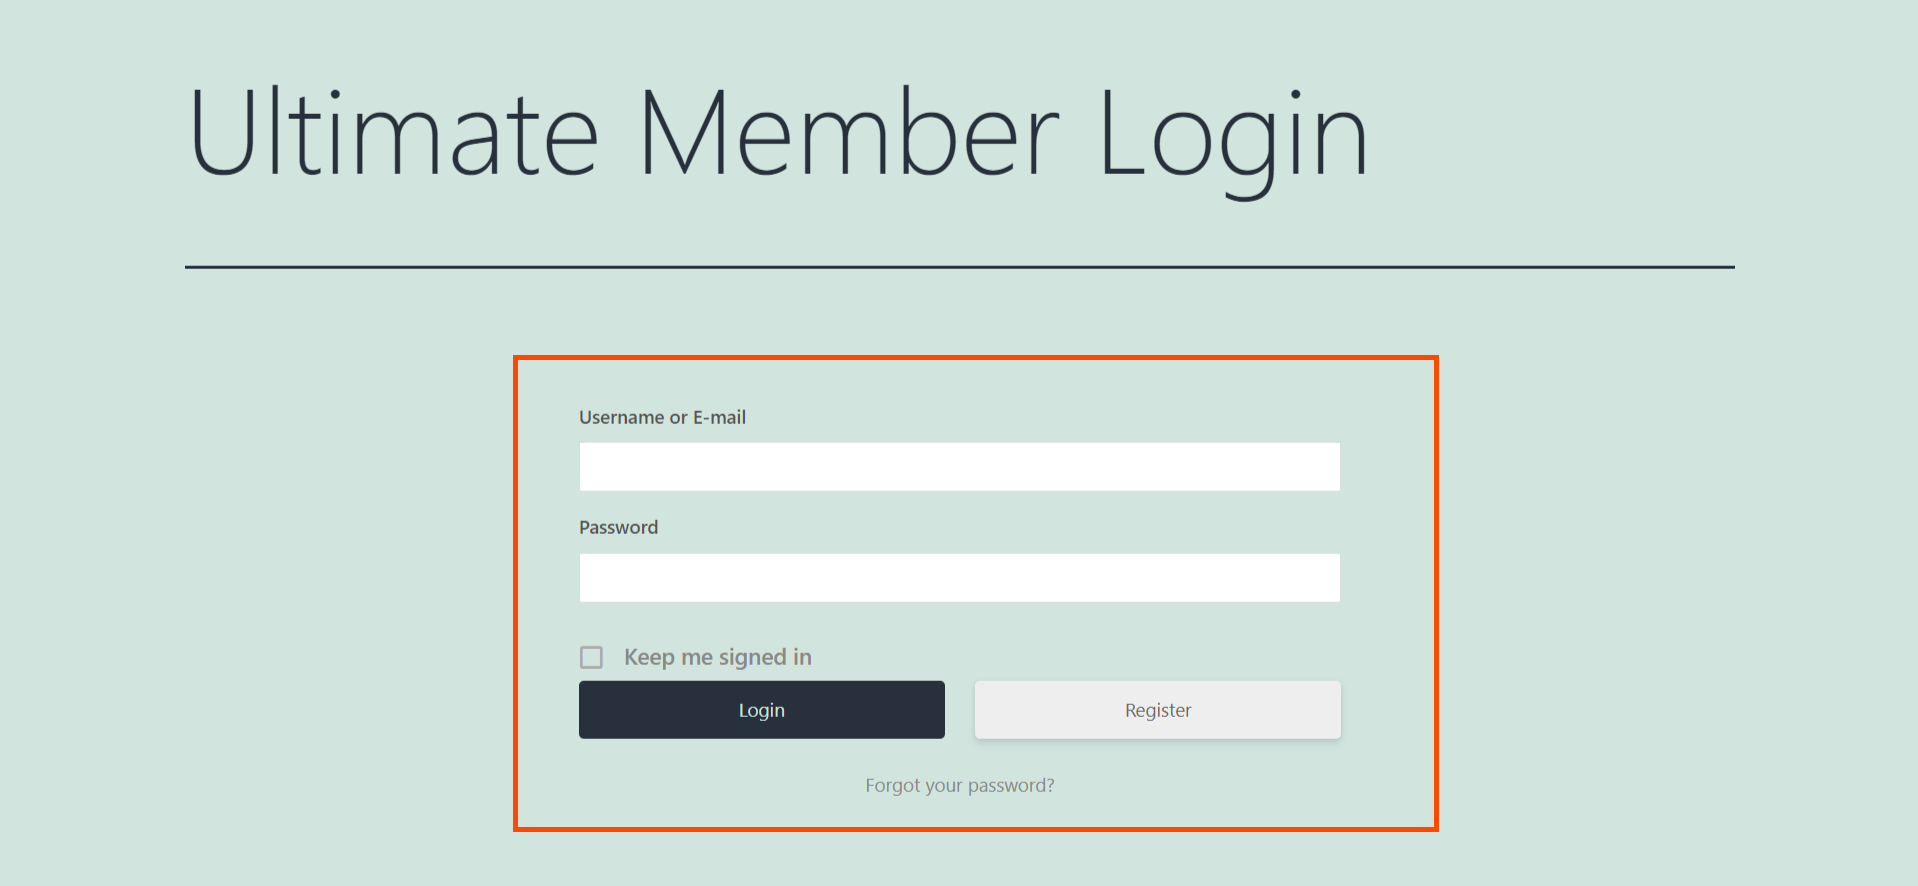 Open the recently created post and login using your LDAP / Active directory credentials.